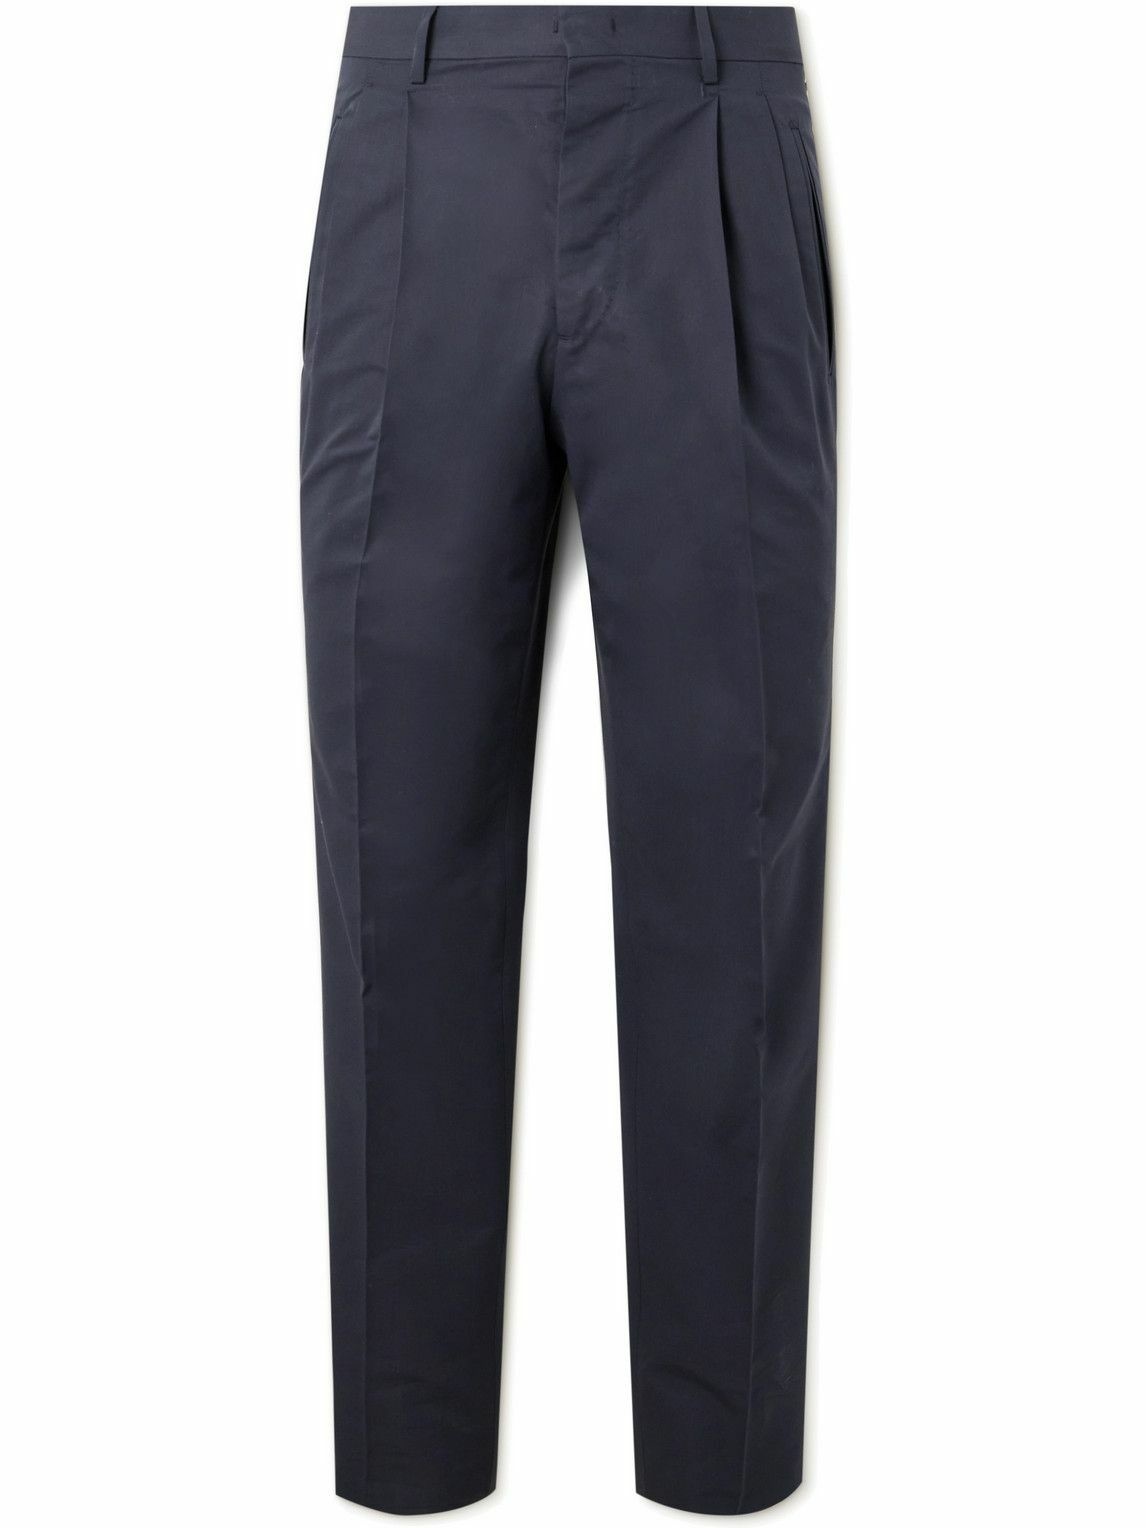 UMIT BENAN B - Slim-Fit Pleated Cotton and Silk-Blend Trousers - Blue